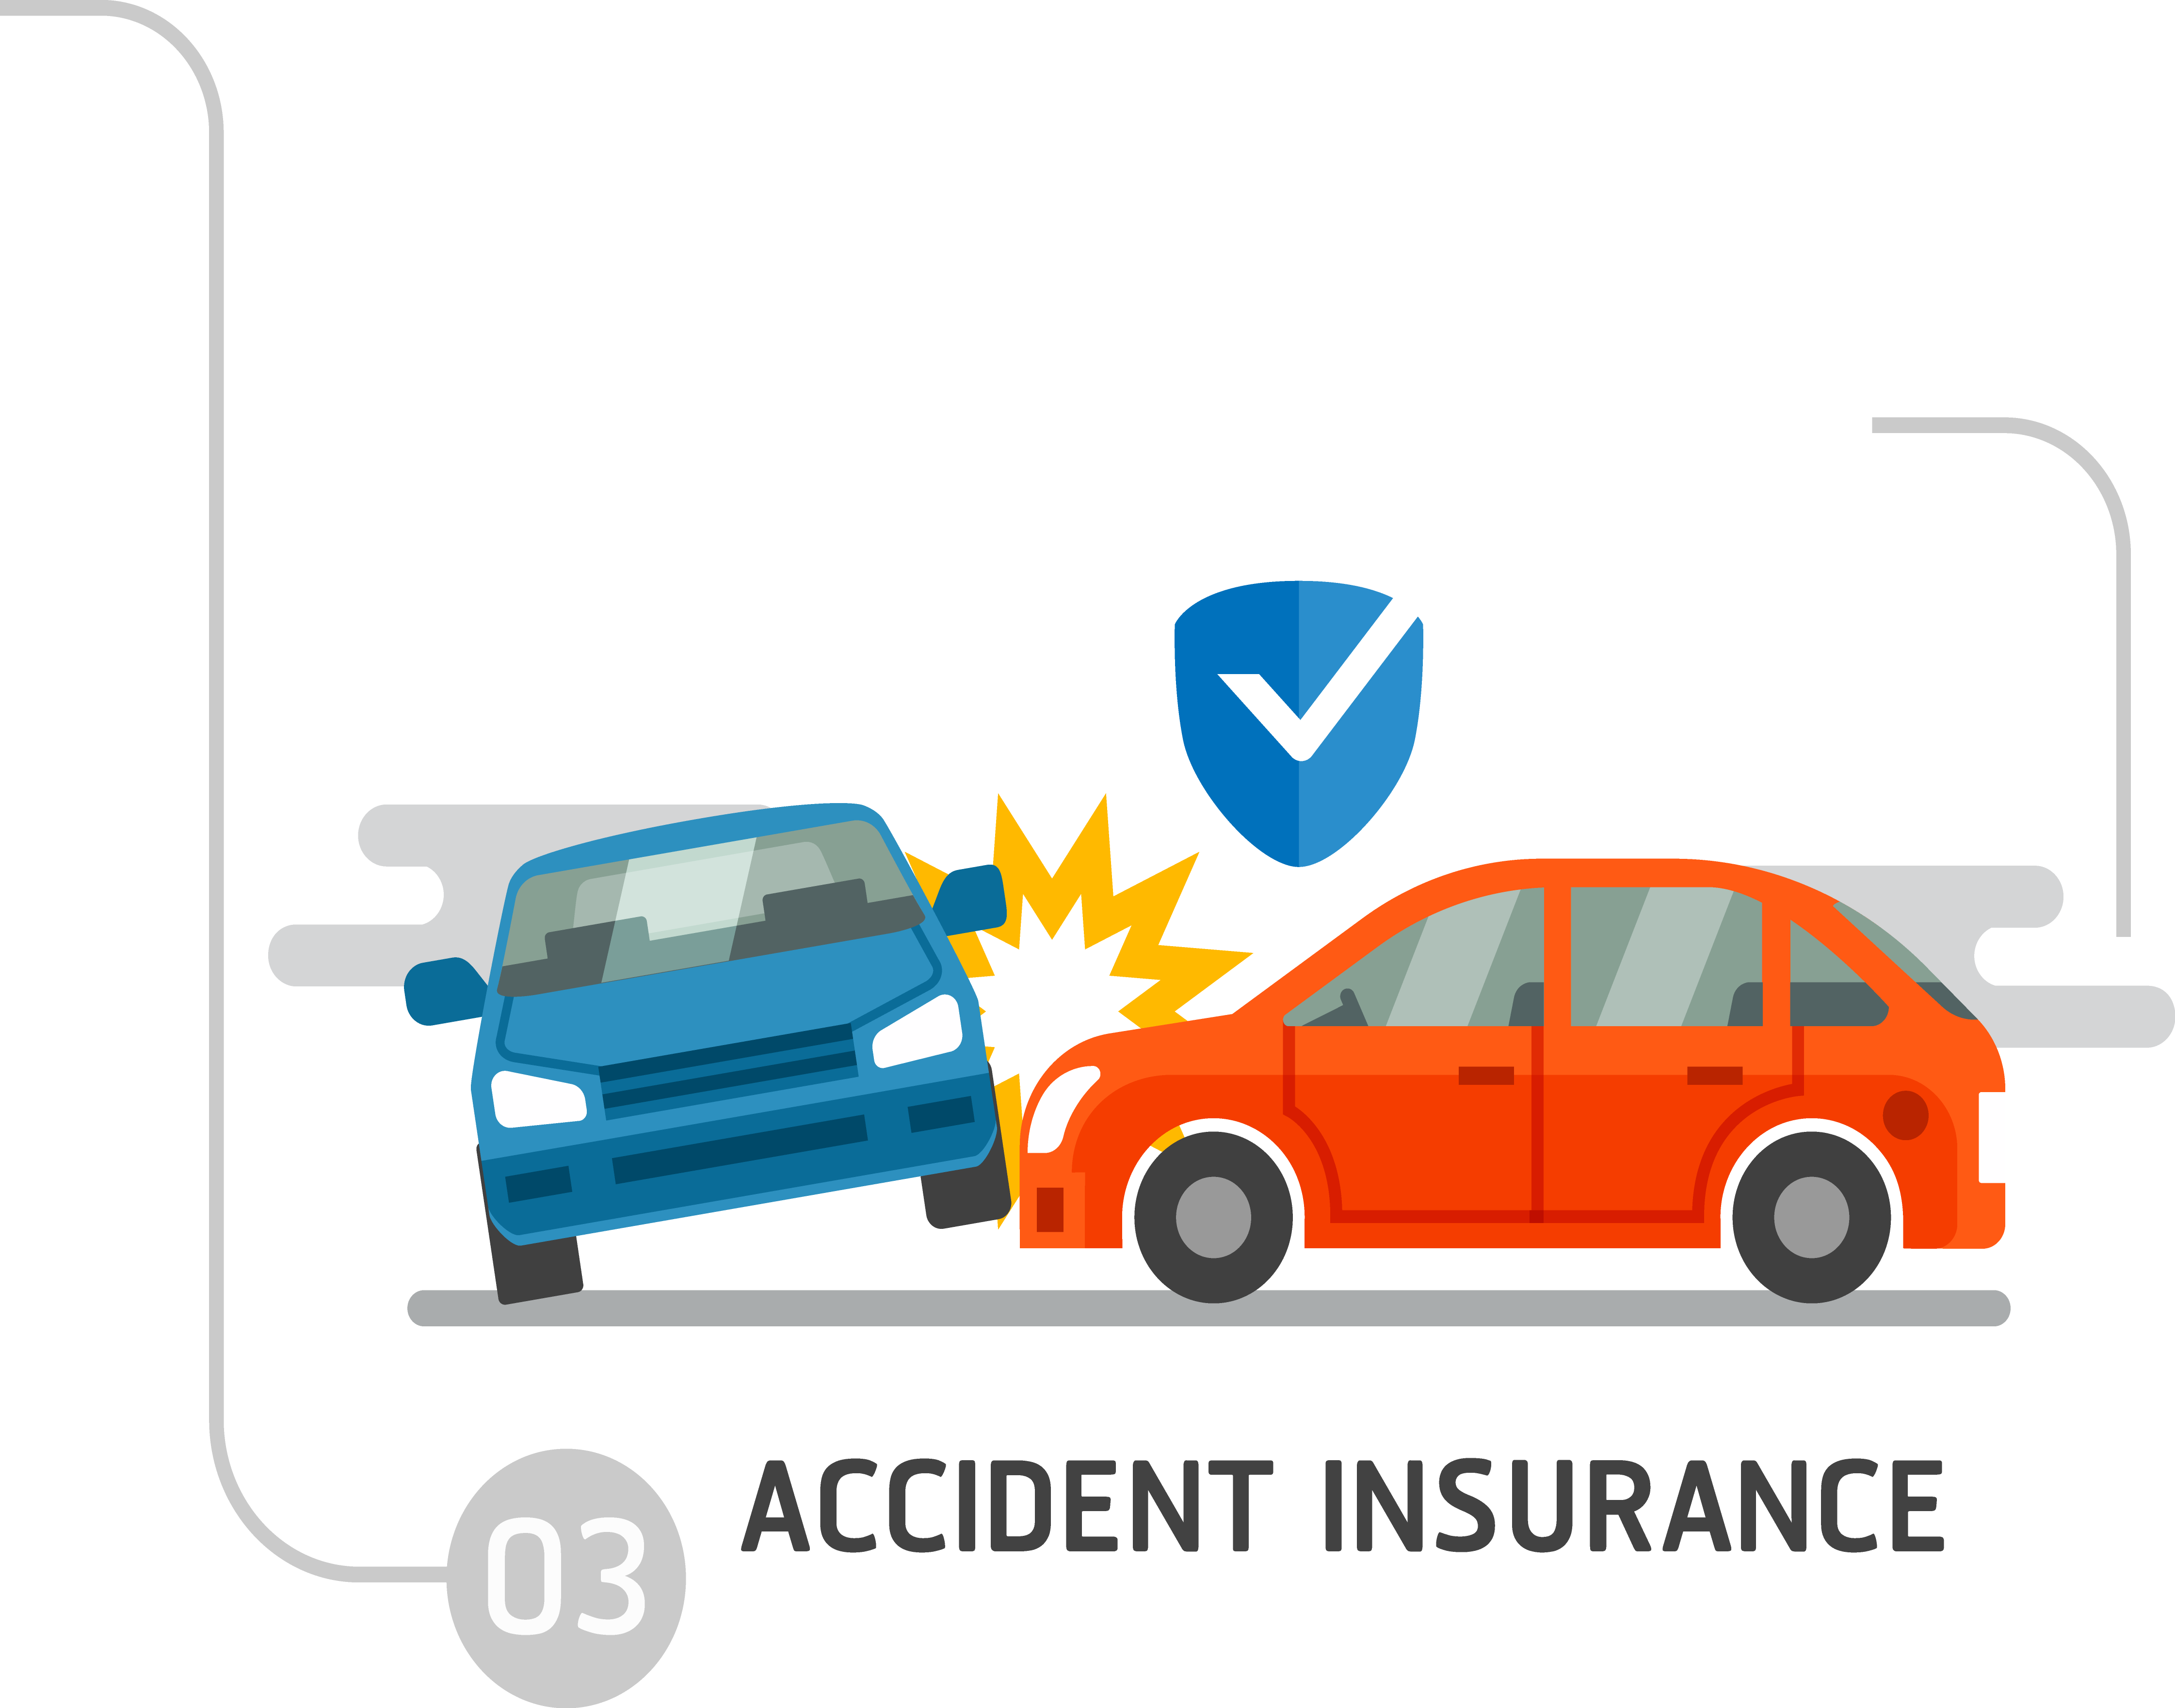 Vehicle Insurance Collision Accident - Car Accident Vector (4485x3522)